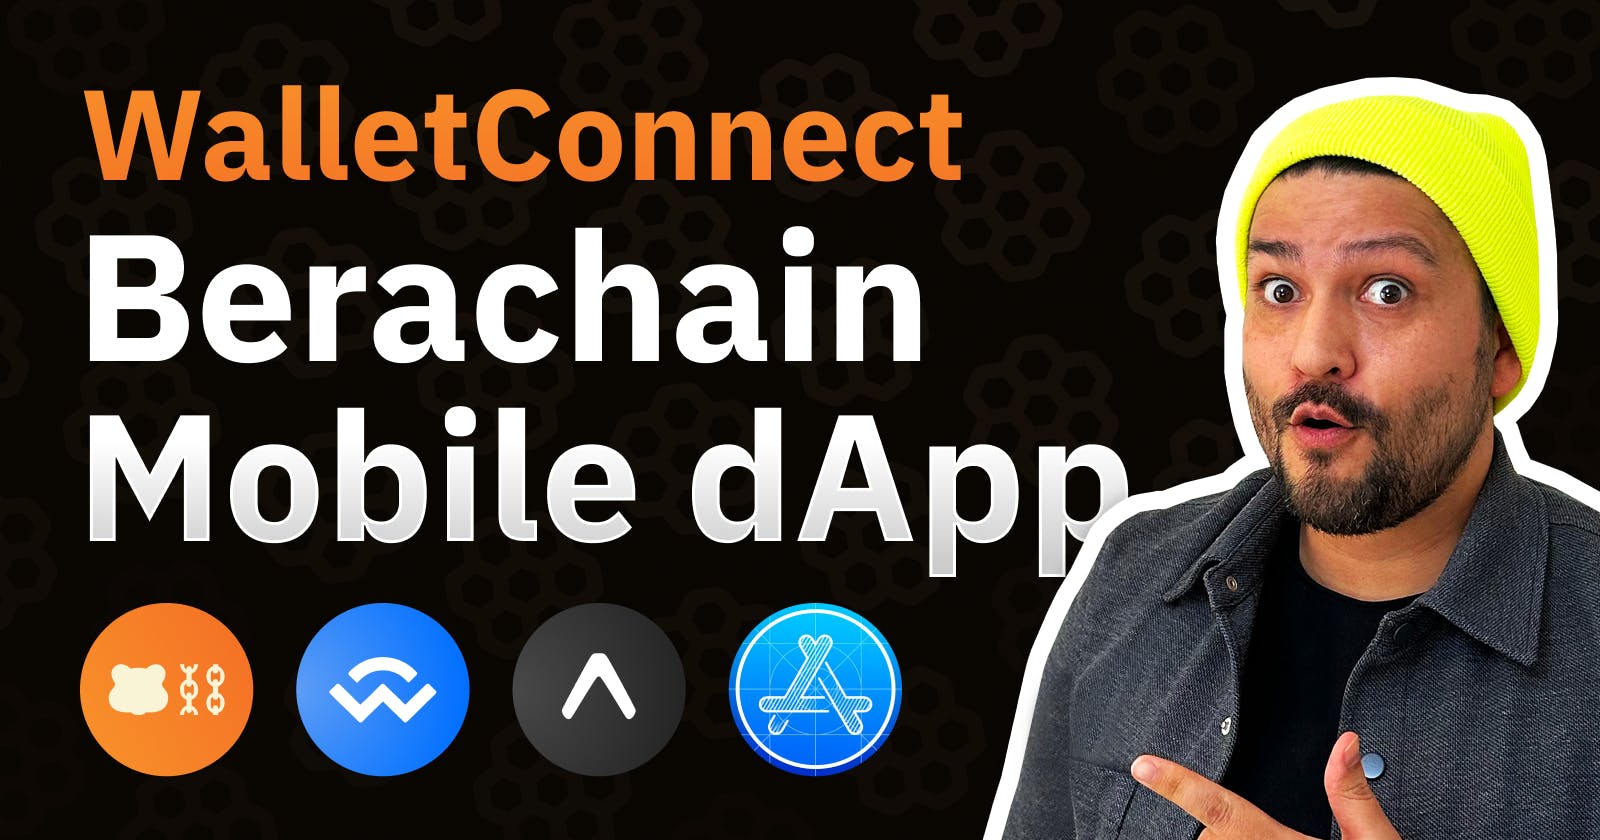 Deploy A Contract To Berachain Using Expo & WalletConnect